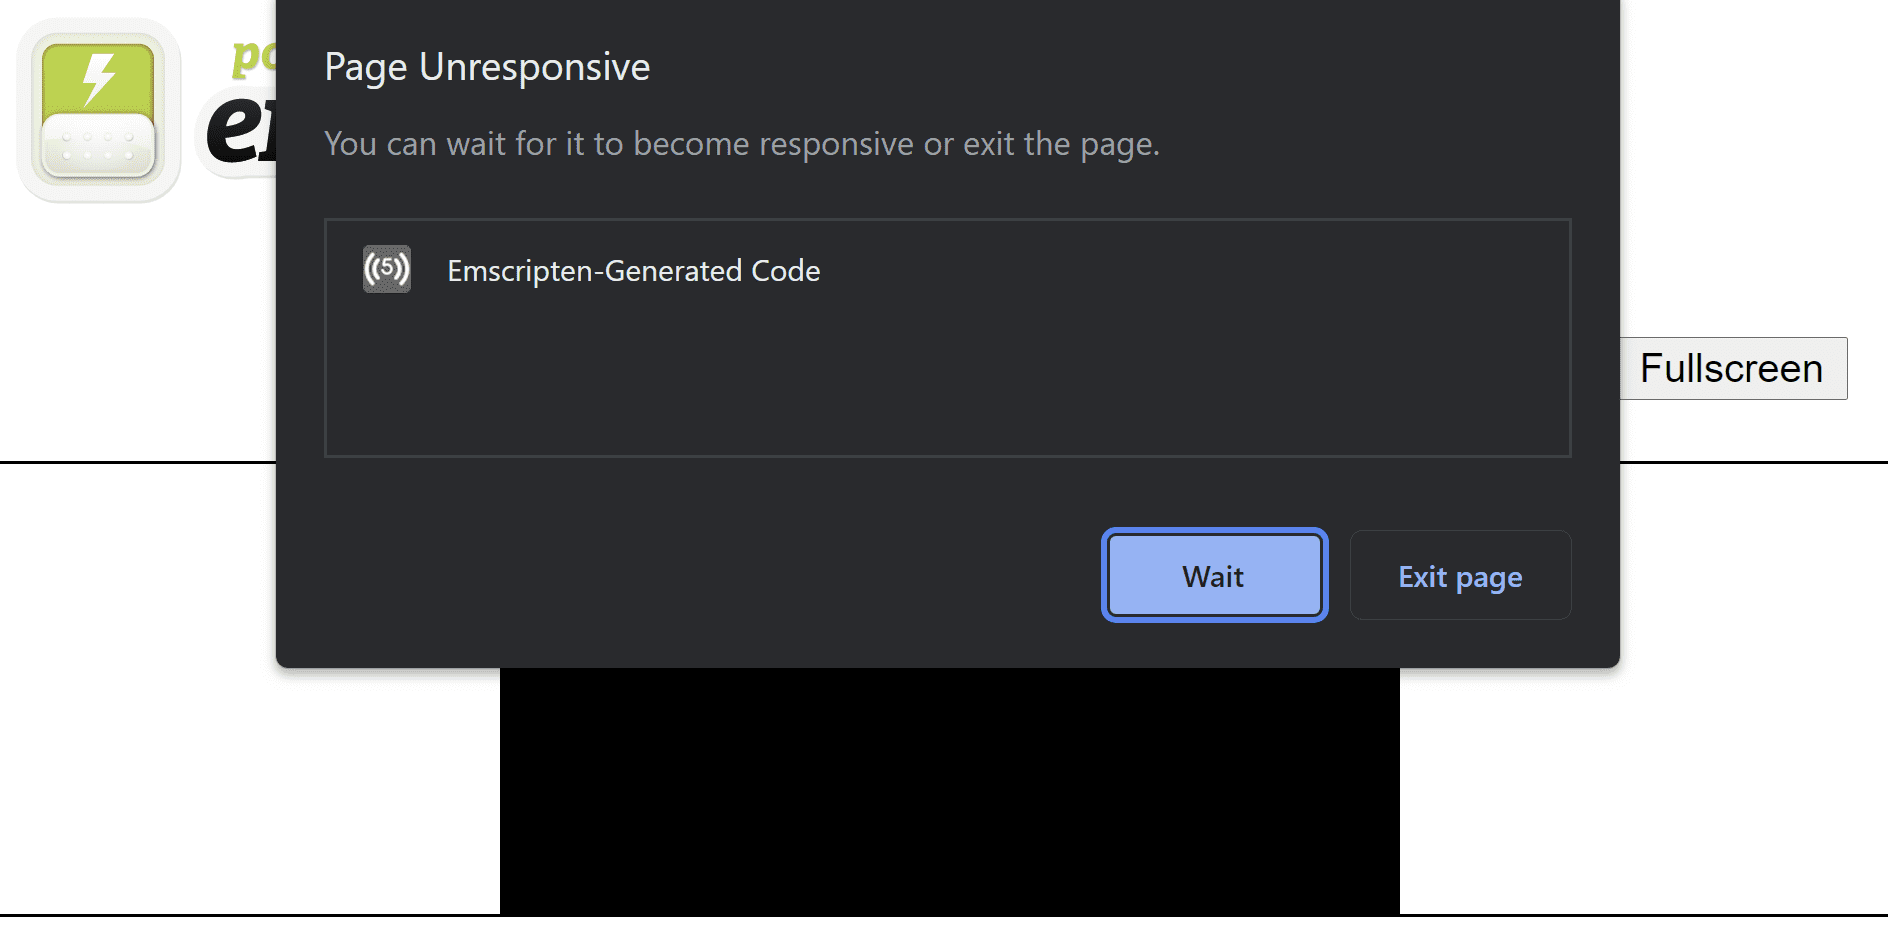 Emscripten-generated HTML page overlaid with a 'Page Unresponsive' error dialogue suggesting to either wait for the page to become responsible or exit the page